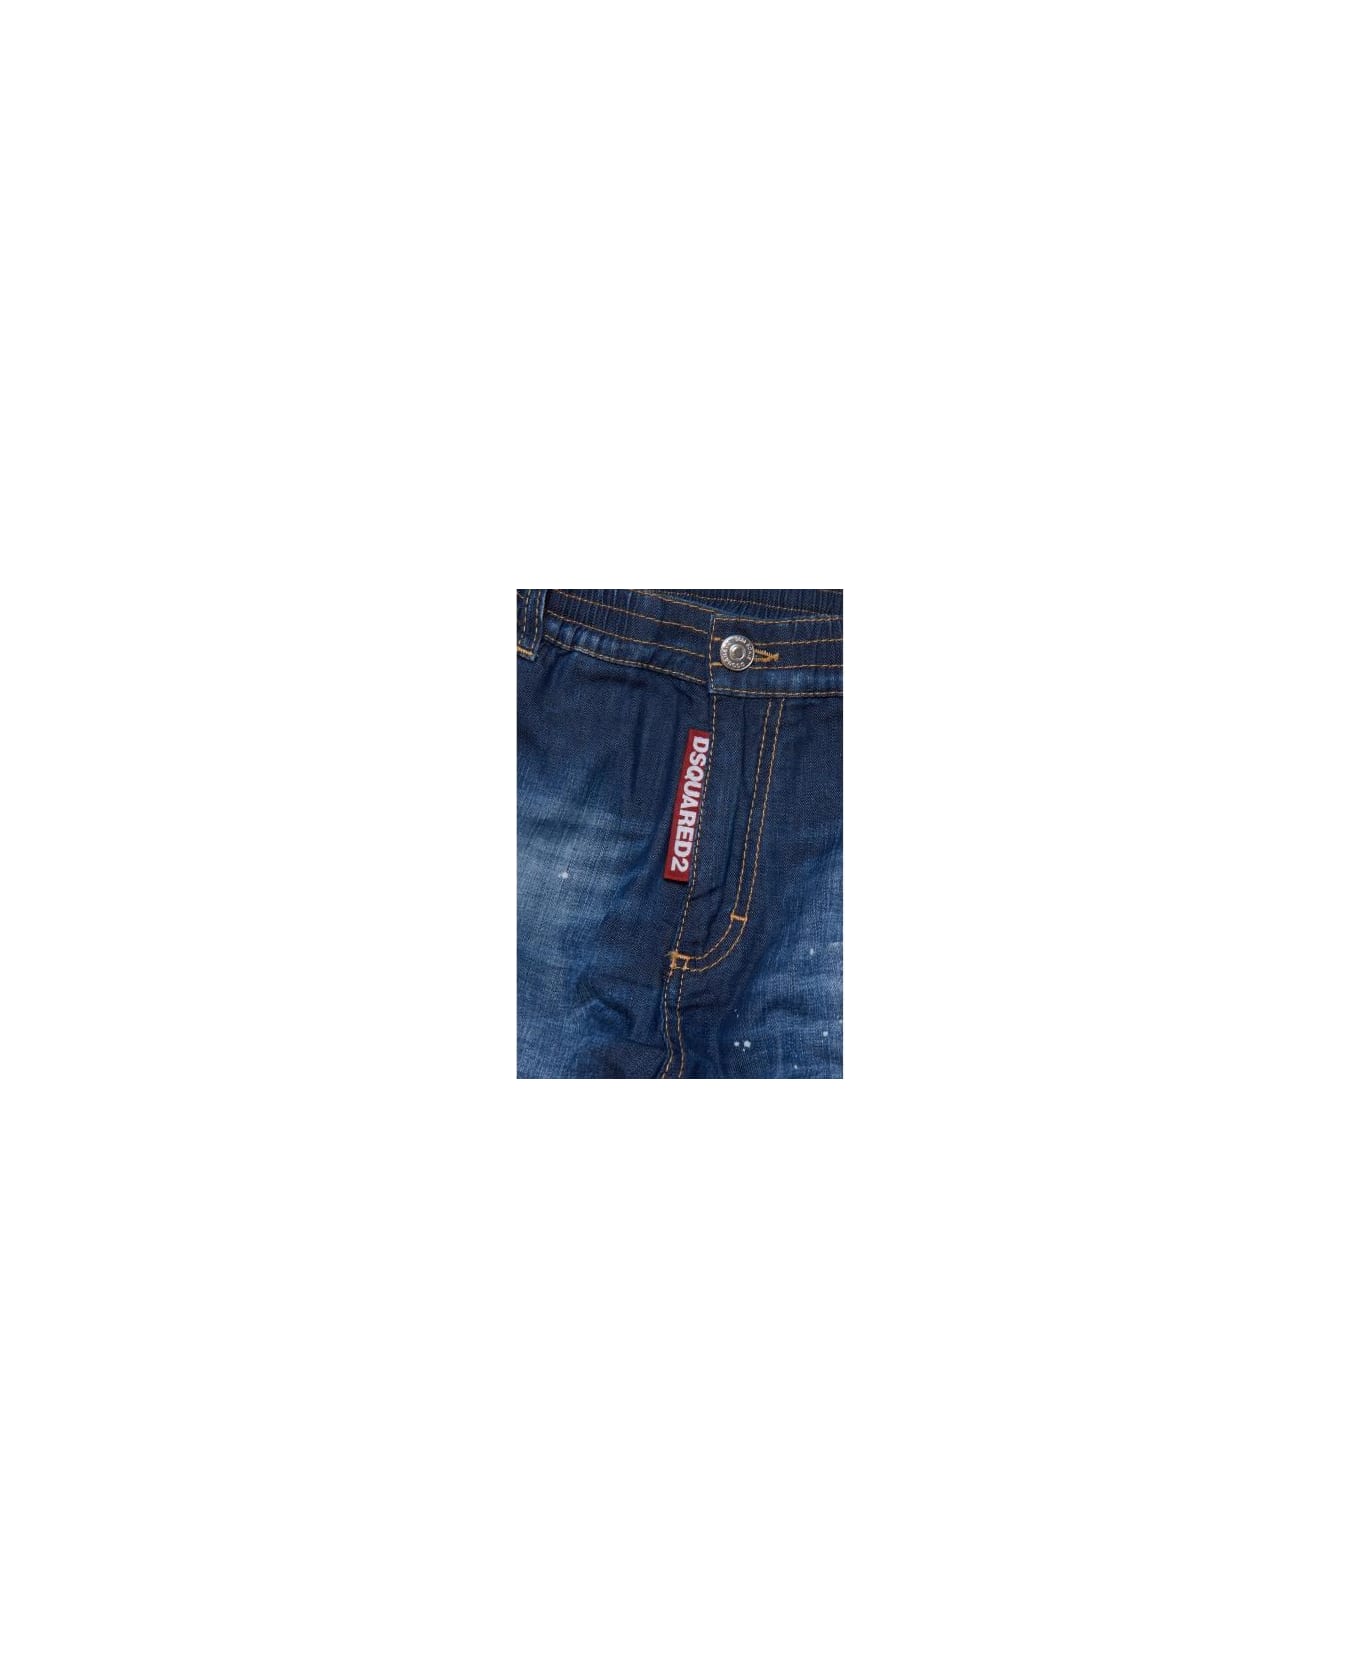 Dsquared2 Wide Leg Jeans - Blue ボトムス